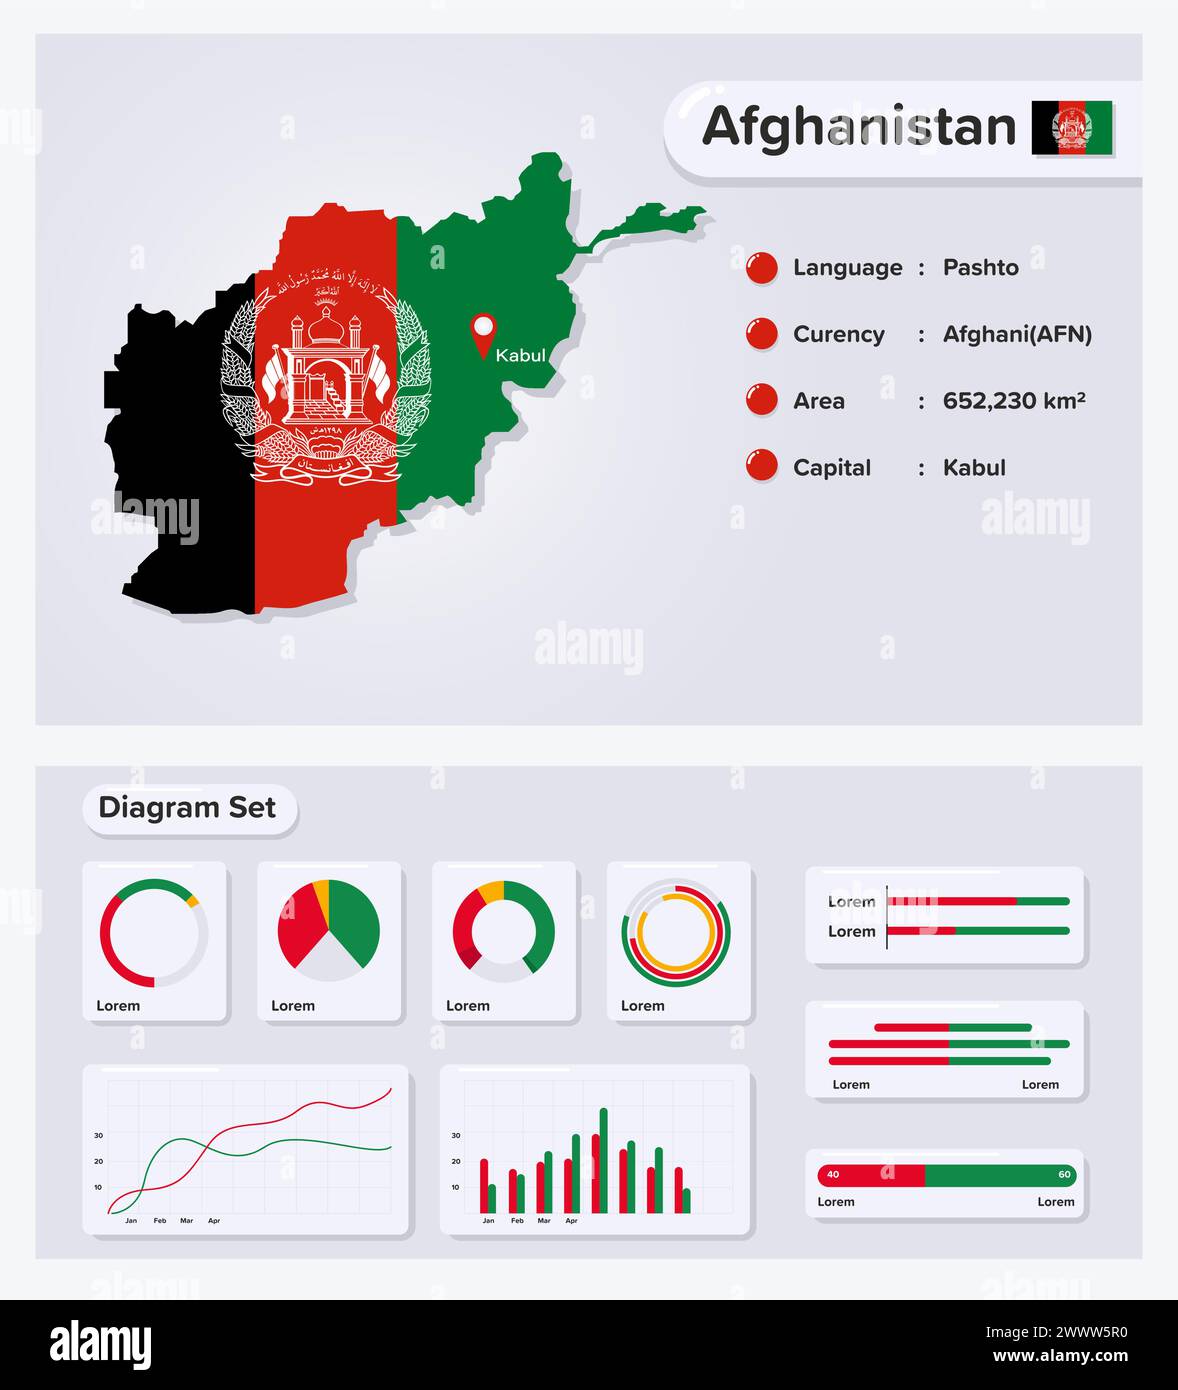 Afghanistan Infographic Vector Illustration, Afghanistan Statistical Data Element, Information Board With Flag Map, Afghanistan Map Flag With Diagram Stock Vector